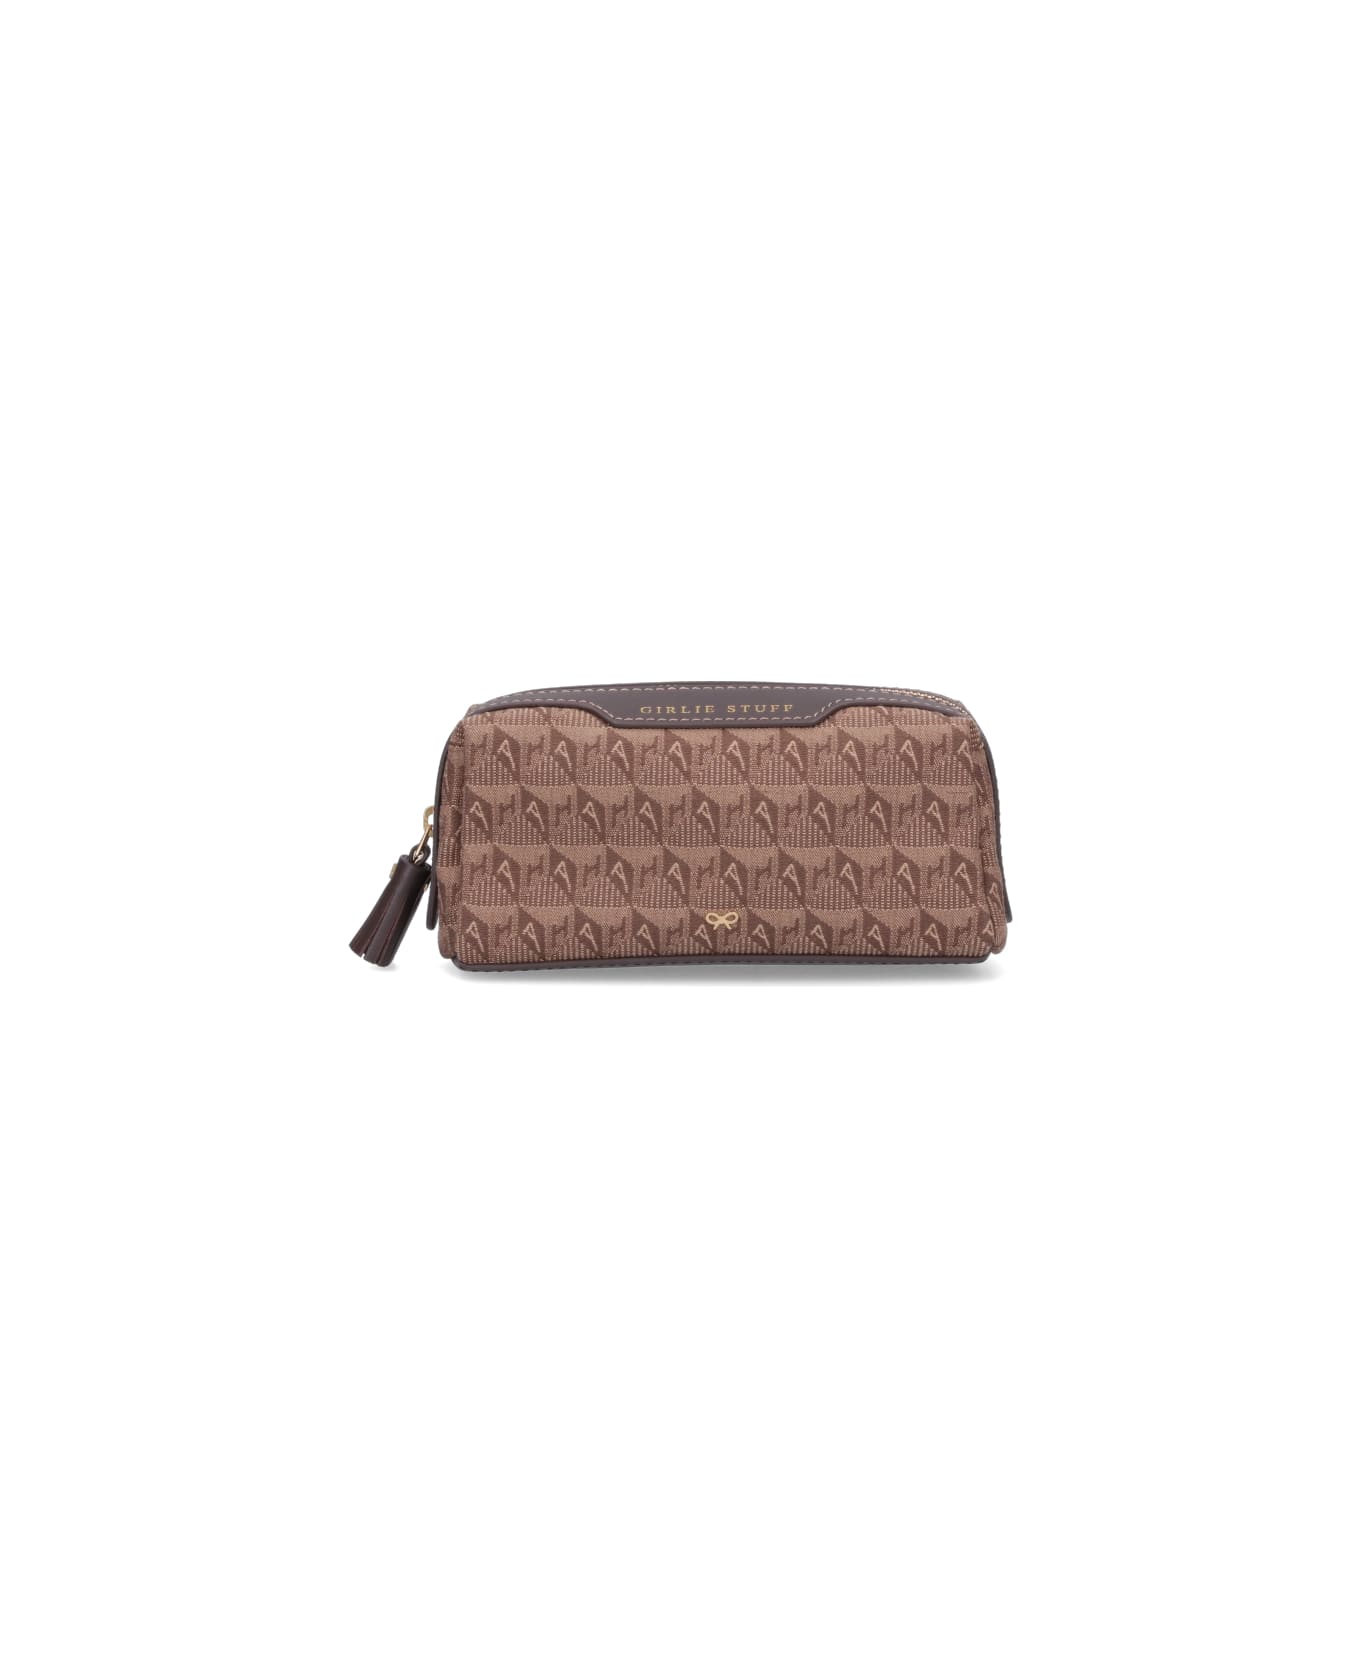 Anya Hindmarch Pouch "girlie Stuff" - Brown